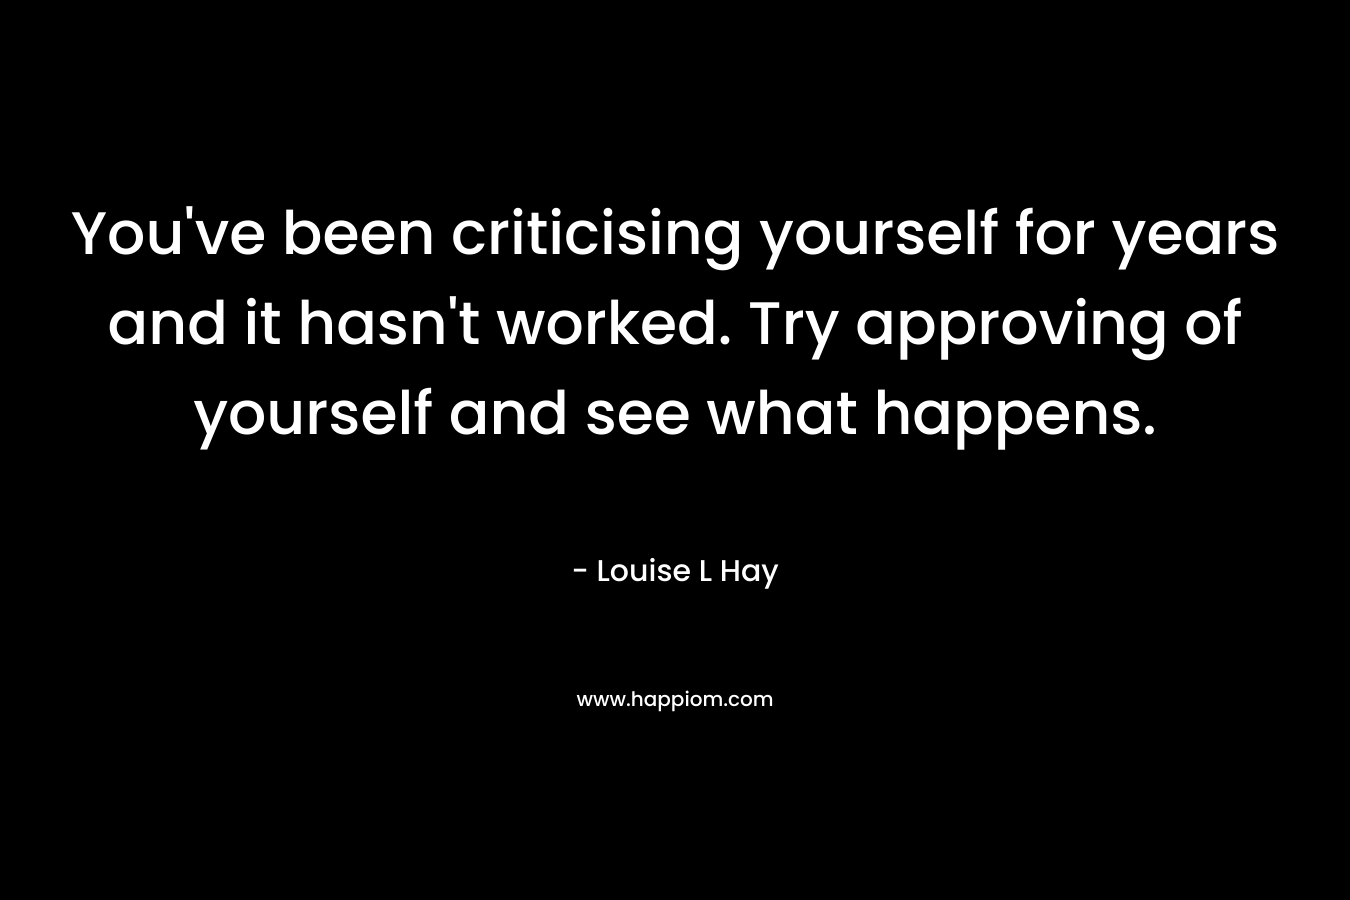 You've been criticising yourself for years and it hasn't worked. Try approving of yourself and see what happens.